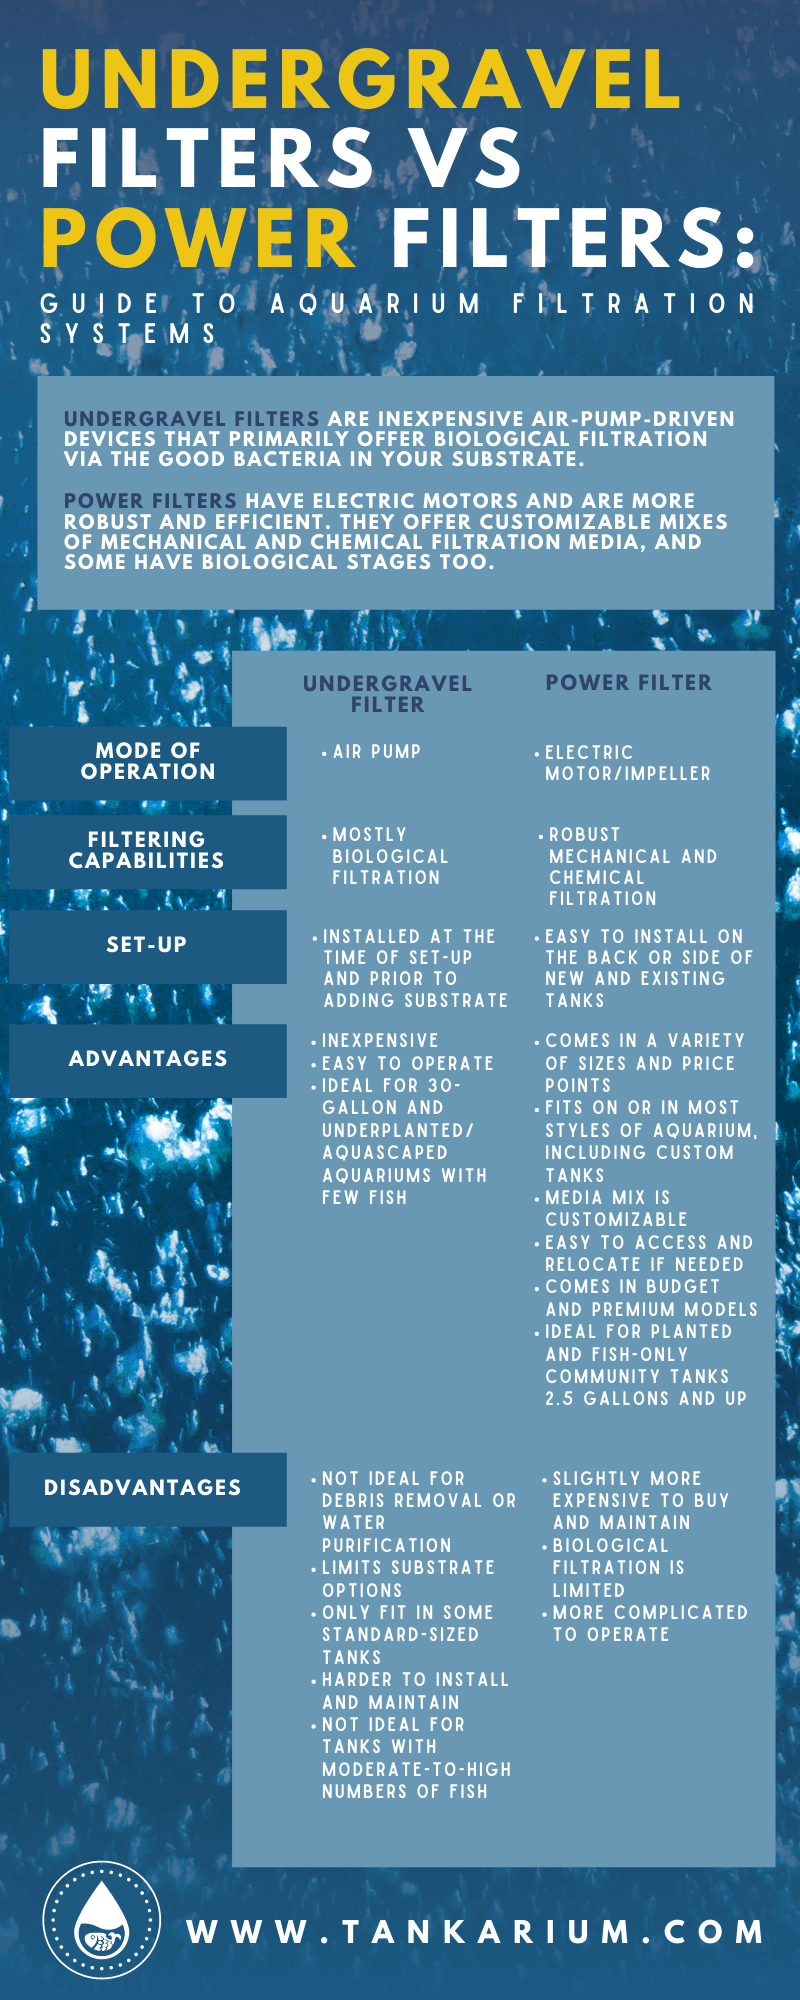 Undergravel Filters vs Power Filters: Guide to Aquarium Filtration Systems - Infographic